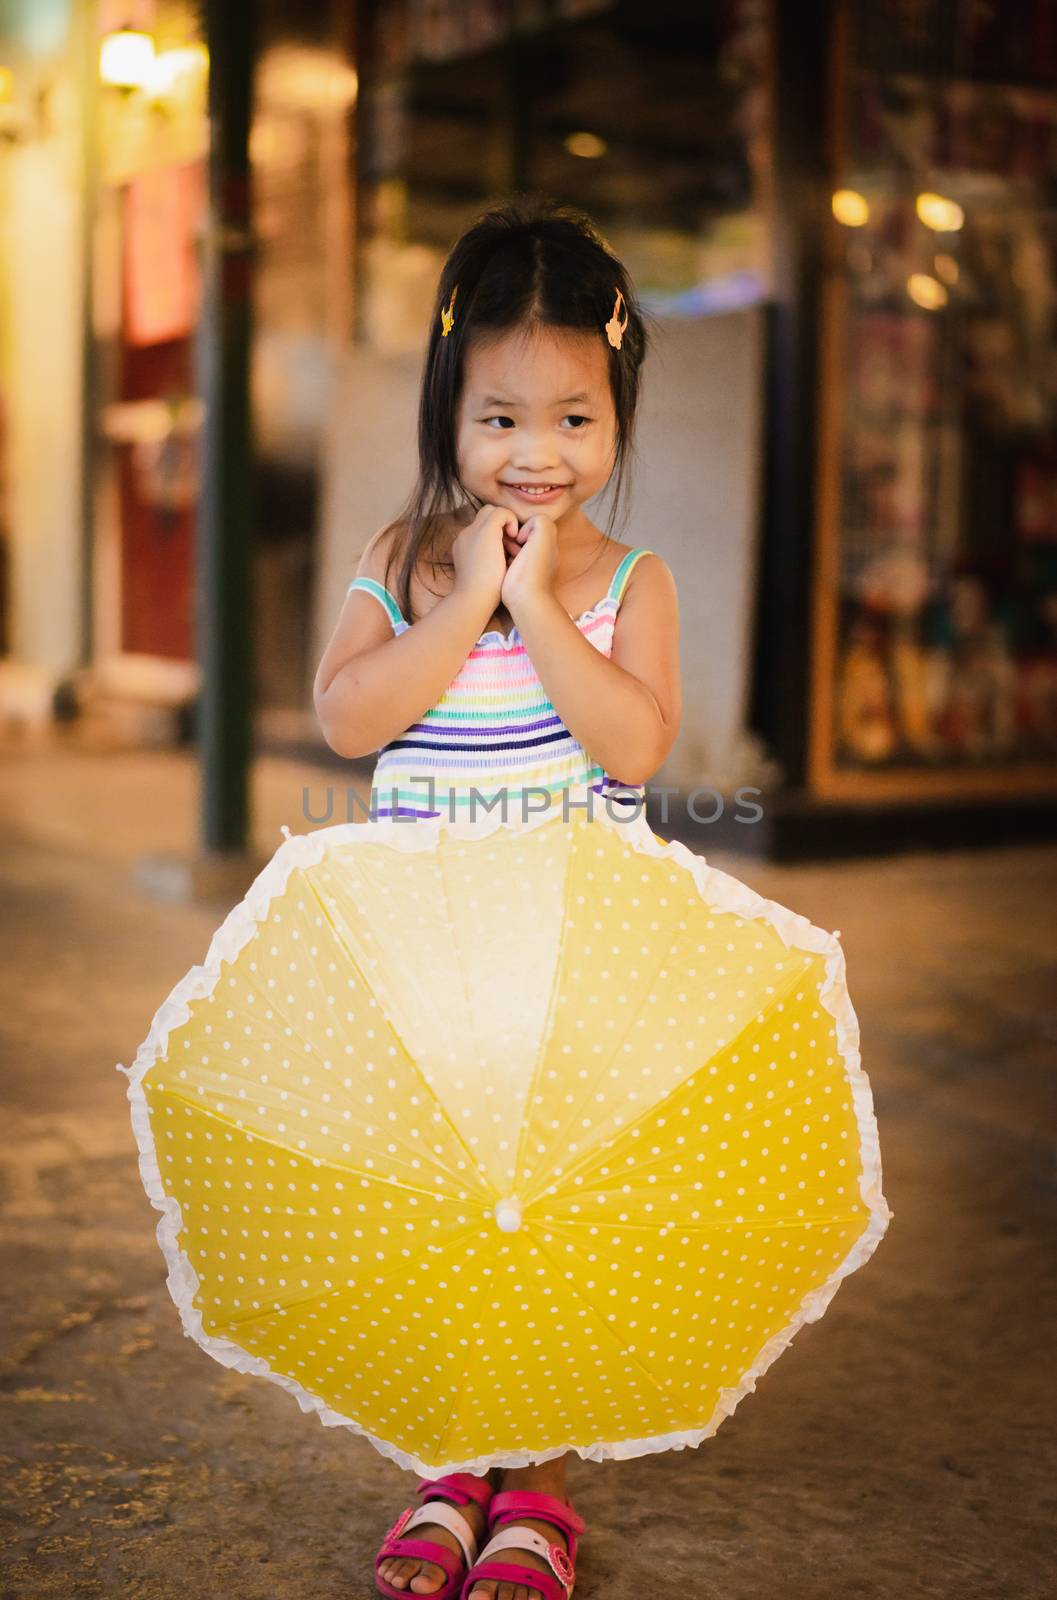 little girl with umbrella in the market on raining day